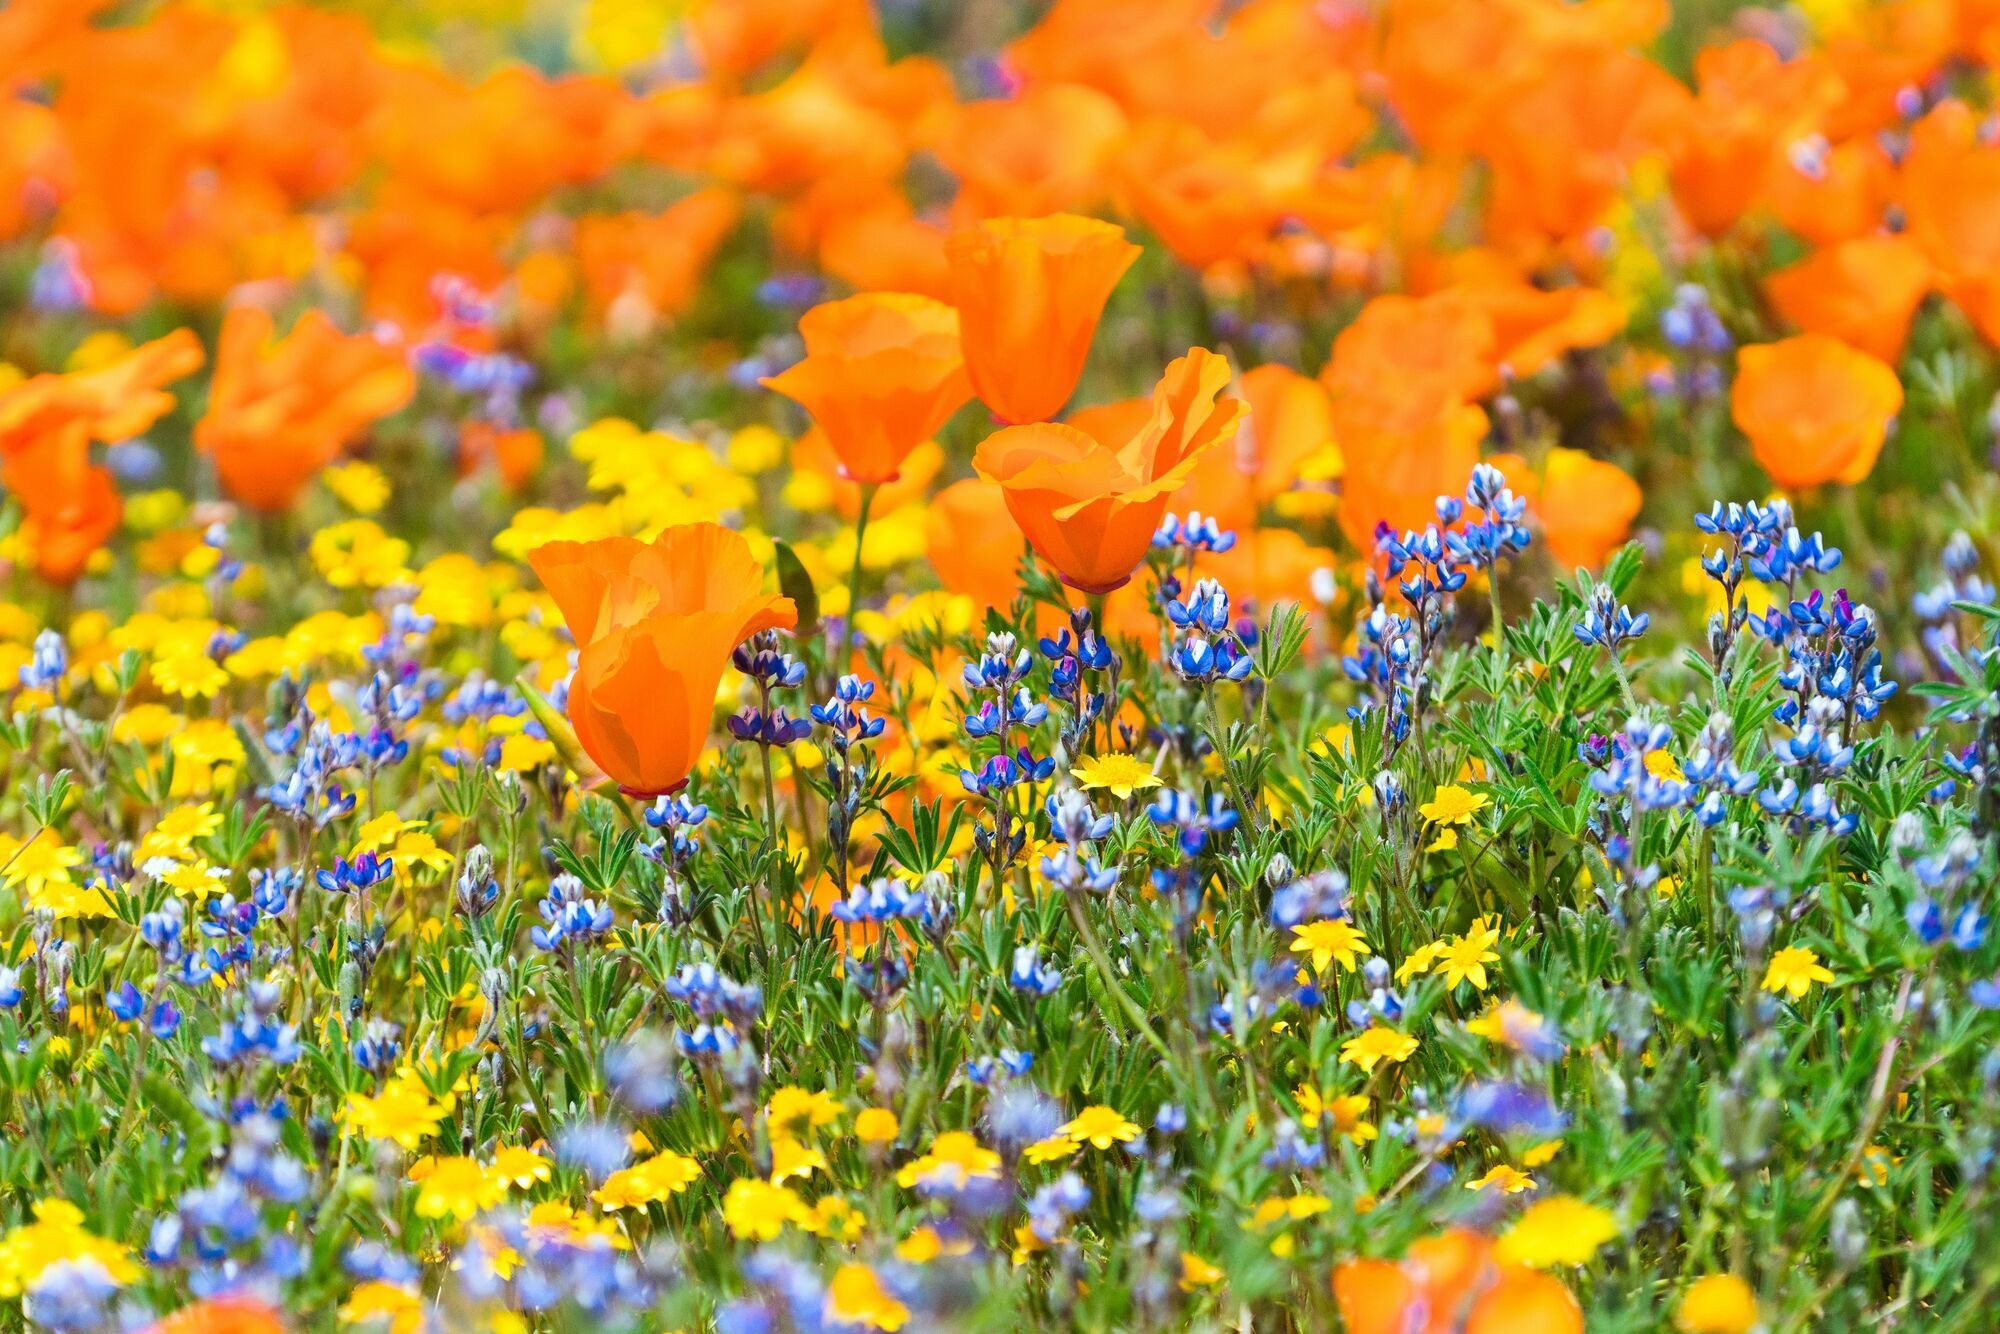 California expects enchanting flower blooms this year